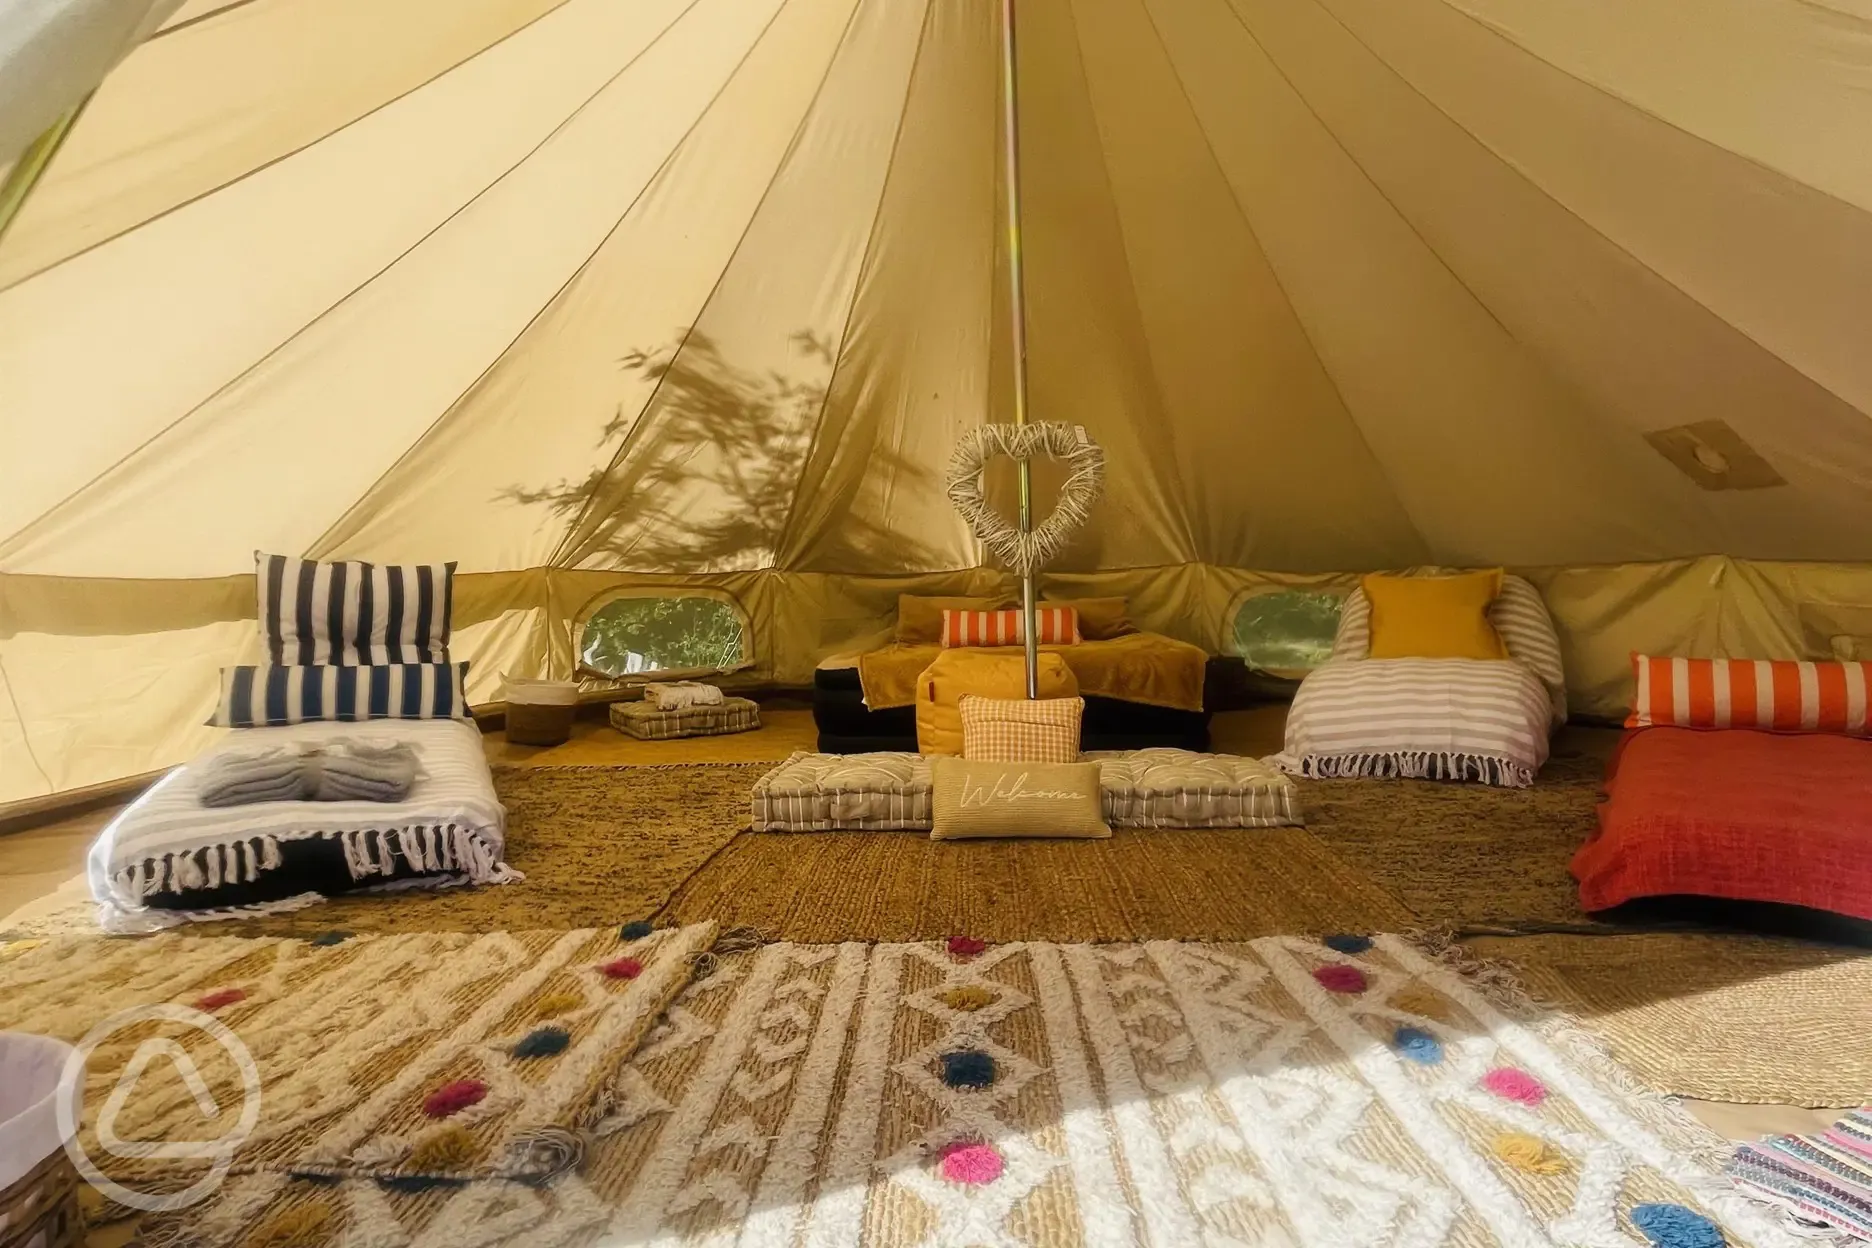 Luxury furnished bell tent interior